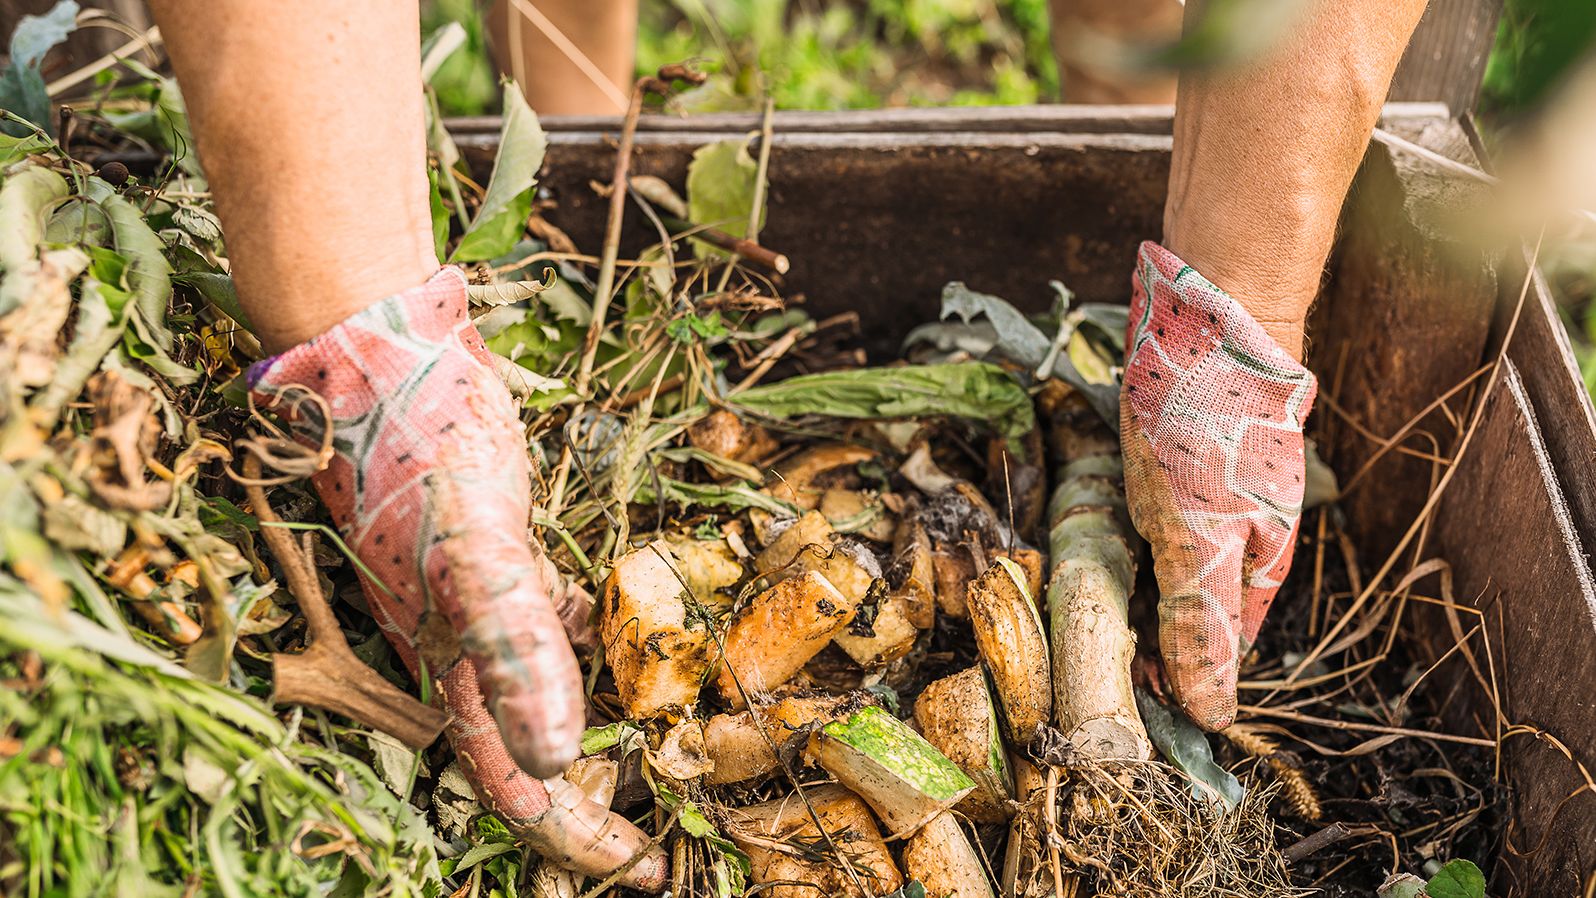 It's important to make sure your compost pile receives enough oxygen so that it does not emit methane, a harmful greenhouse gas.